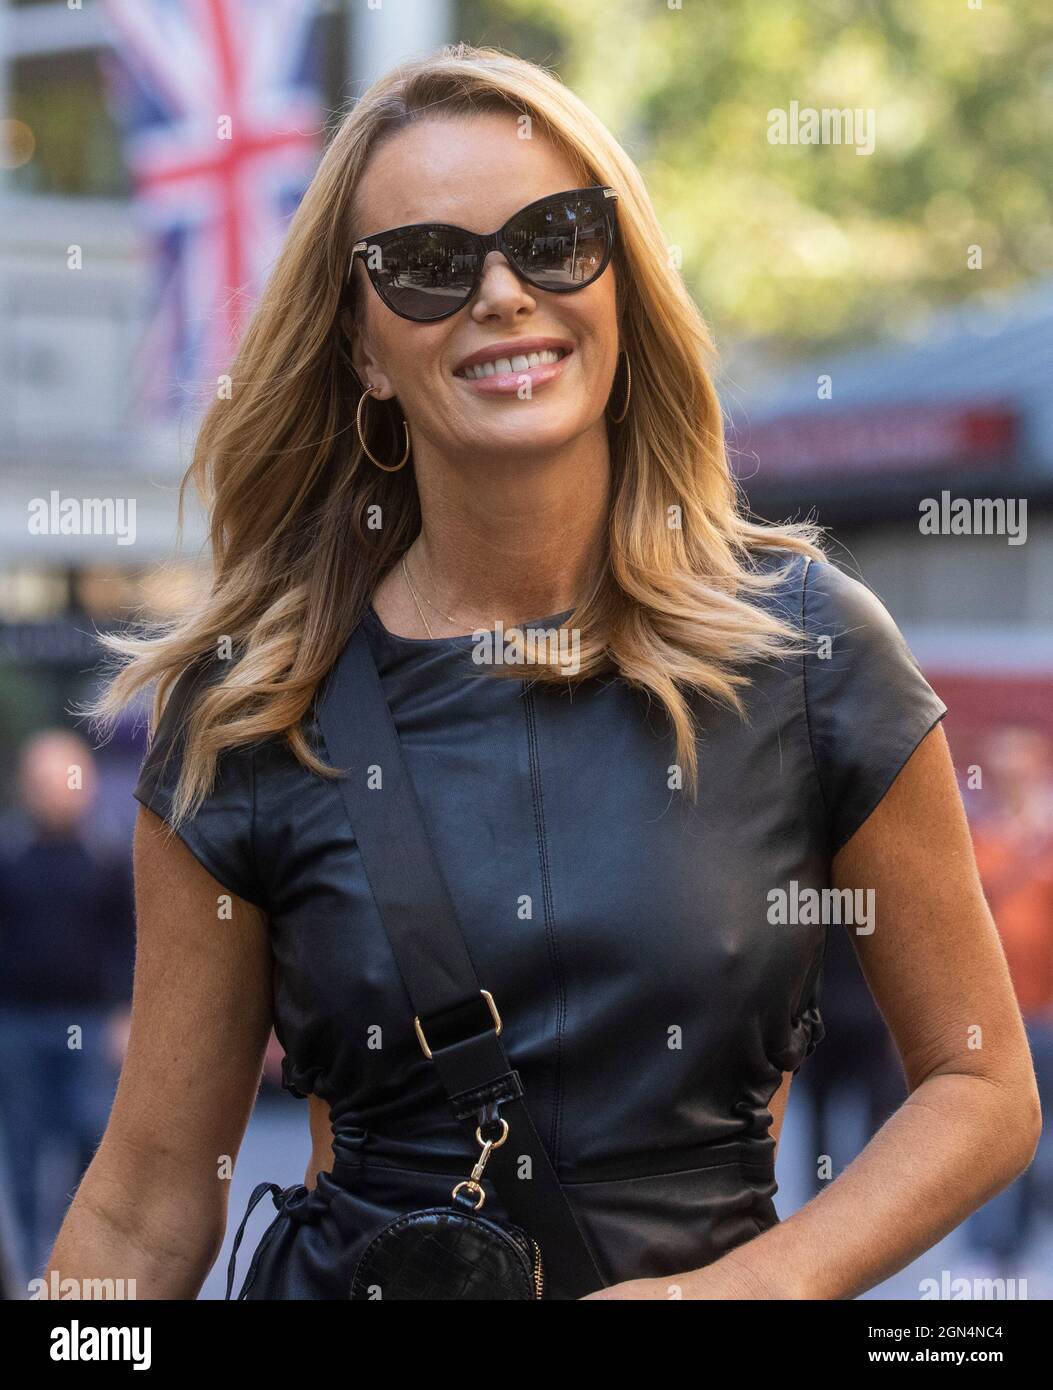 Actress and television presenter, Amanda Holden, leaves the offices of Global Radio after presenting her show on Heart. Stock Photo